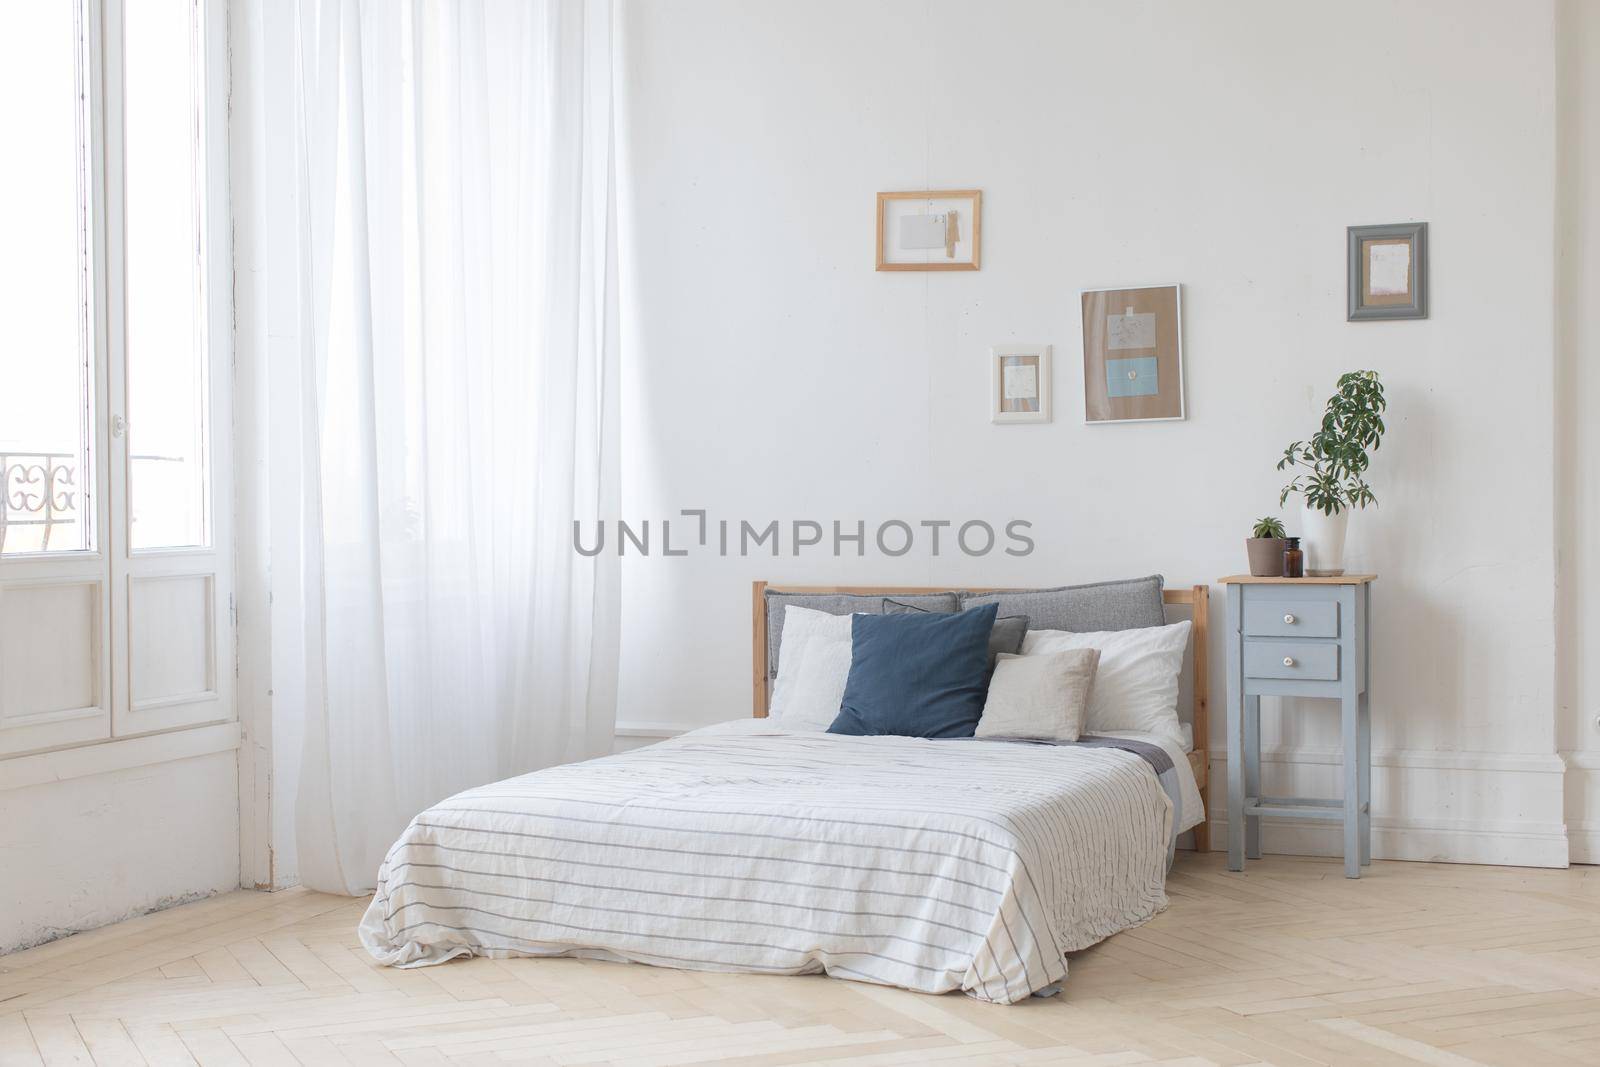 Interior of white and gray cozy bedroom with plants on the bedside table